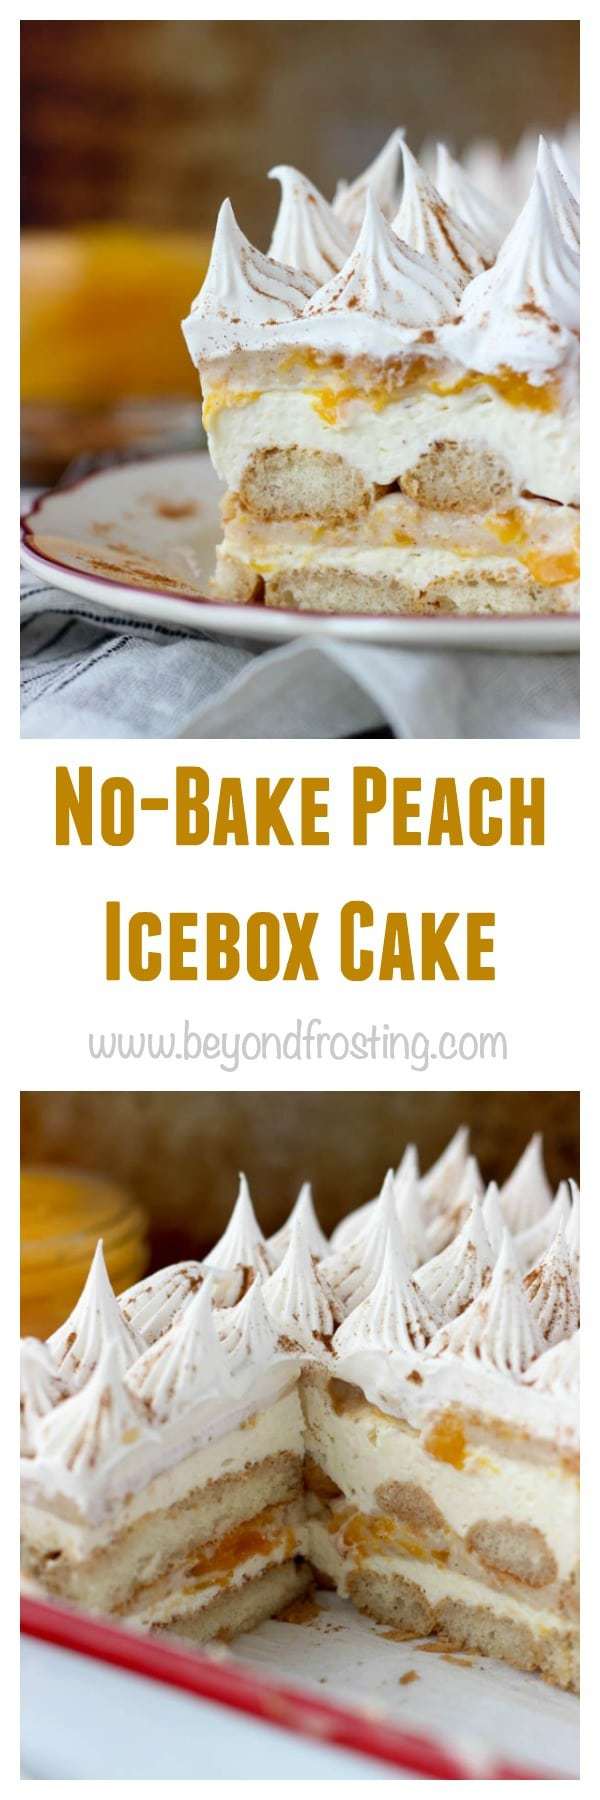  Summer time is the perfect time for No-Bake Peach Icebox Cake. Layers of bourbon and cinnamon soaked ladyfingers, mascarpone cheese and peach pie filling. Make sure you get a little bit of every layer in each bite.